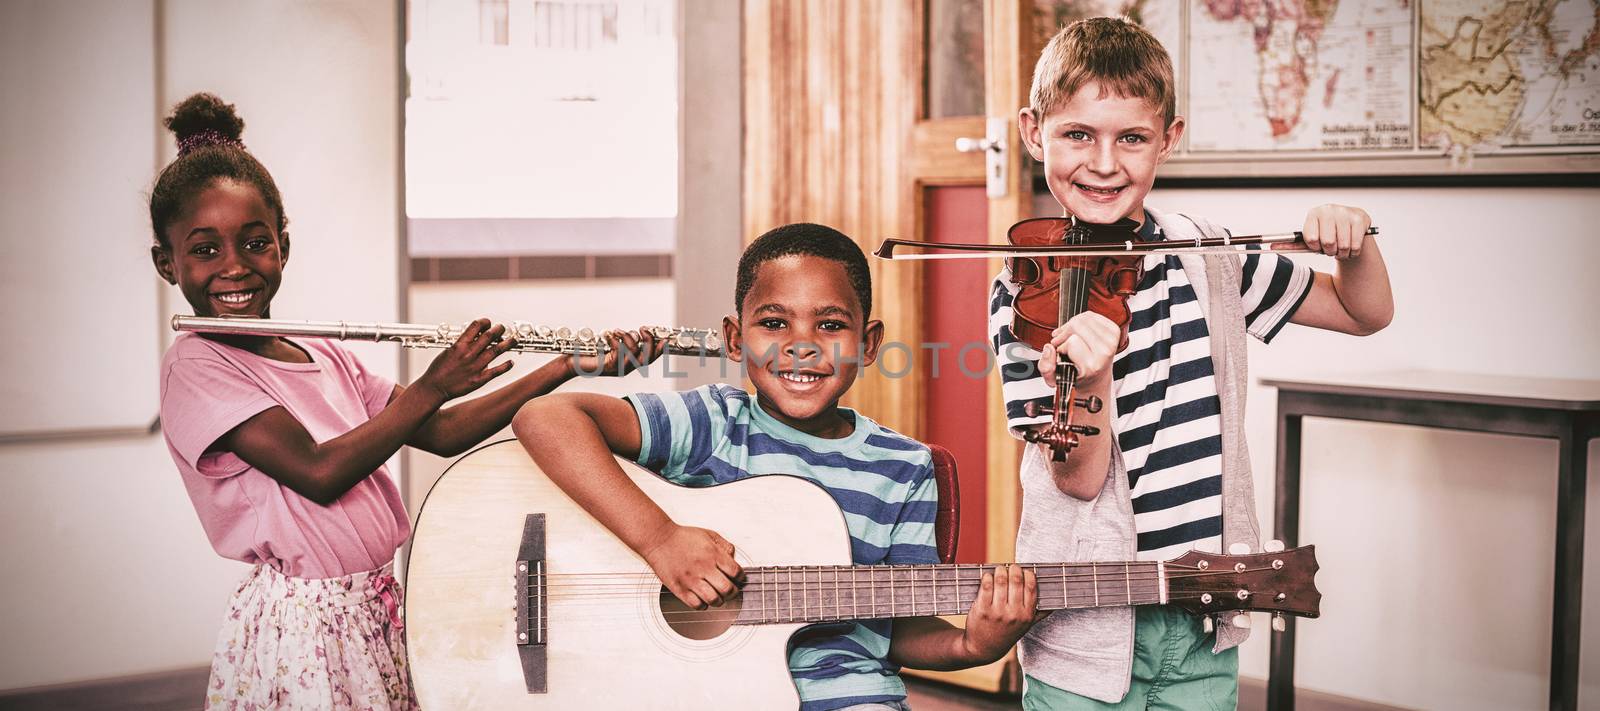 Portrait of children playing musical instruments in classroom by Wavebreakmedia